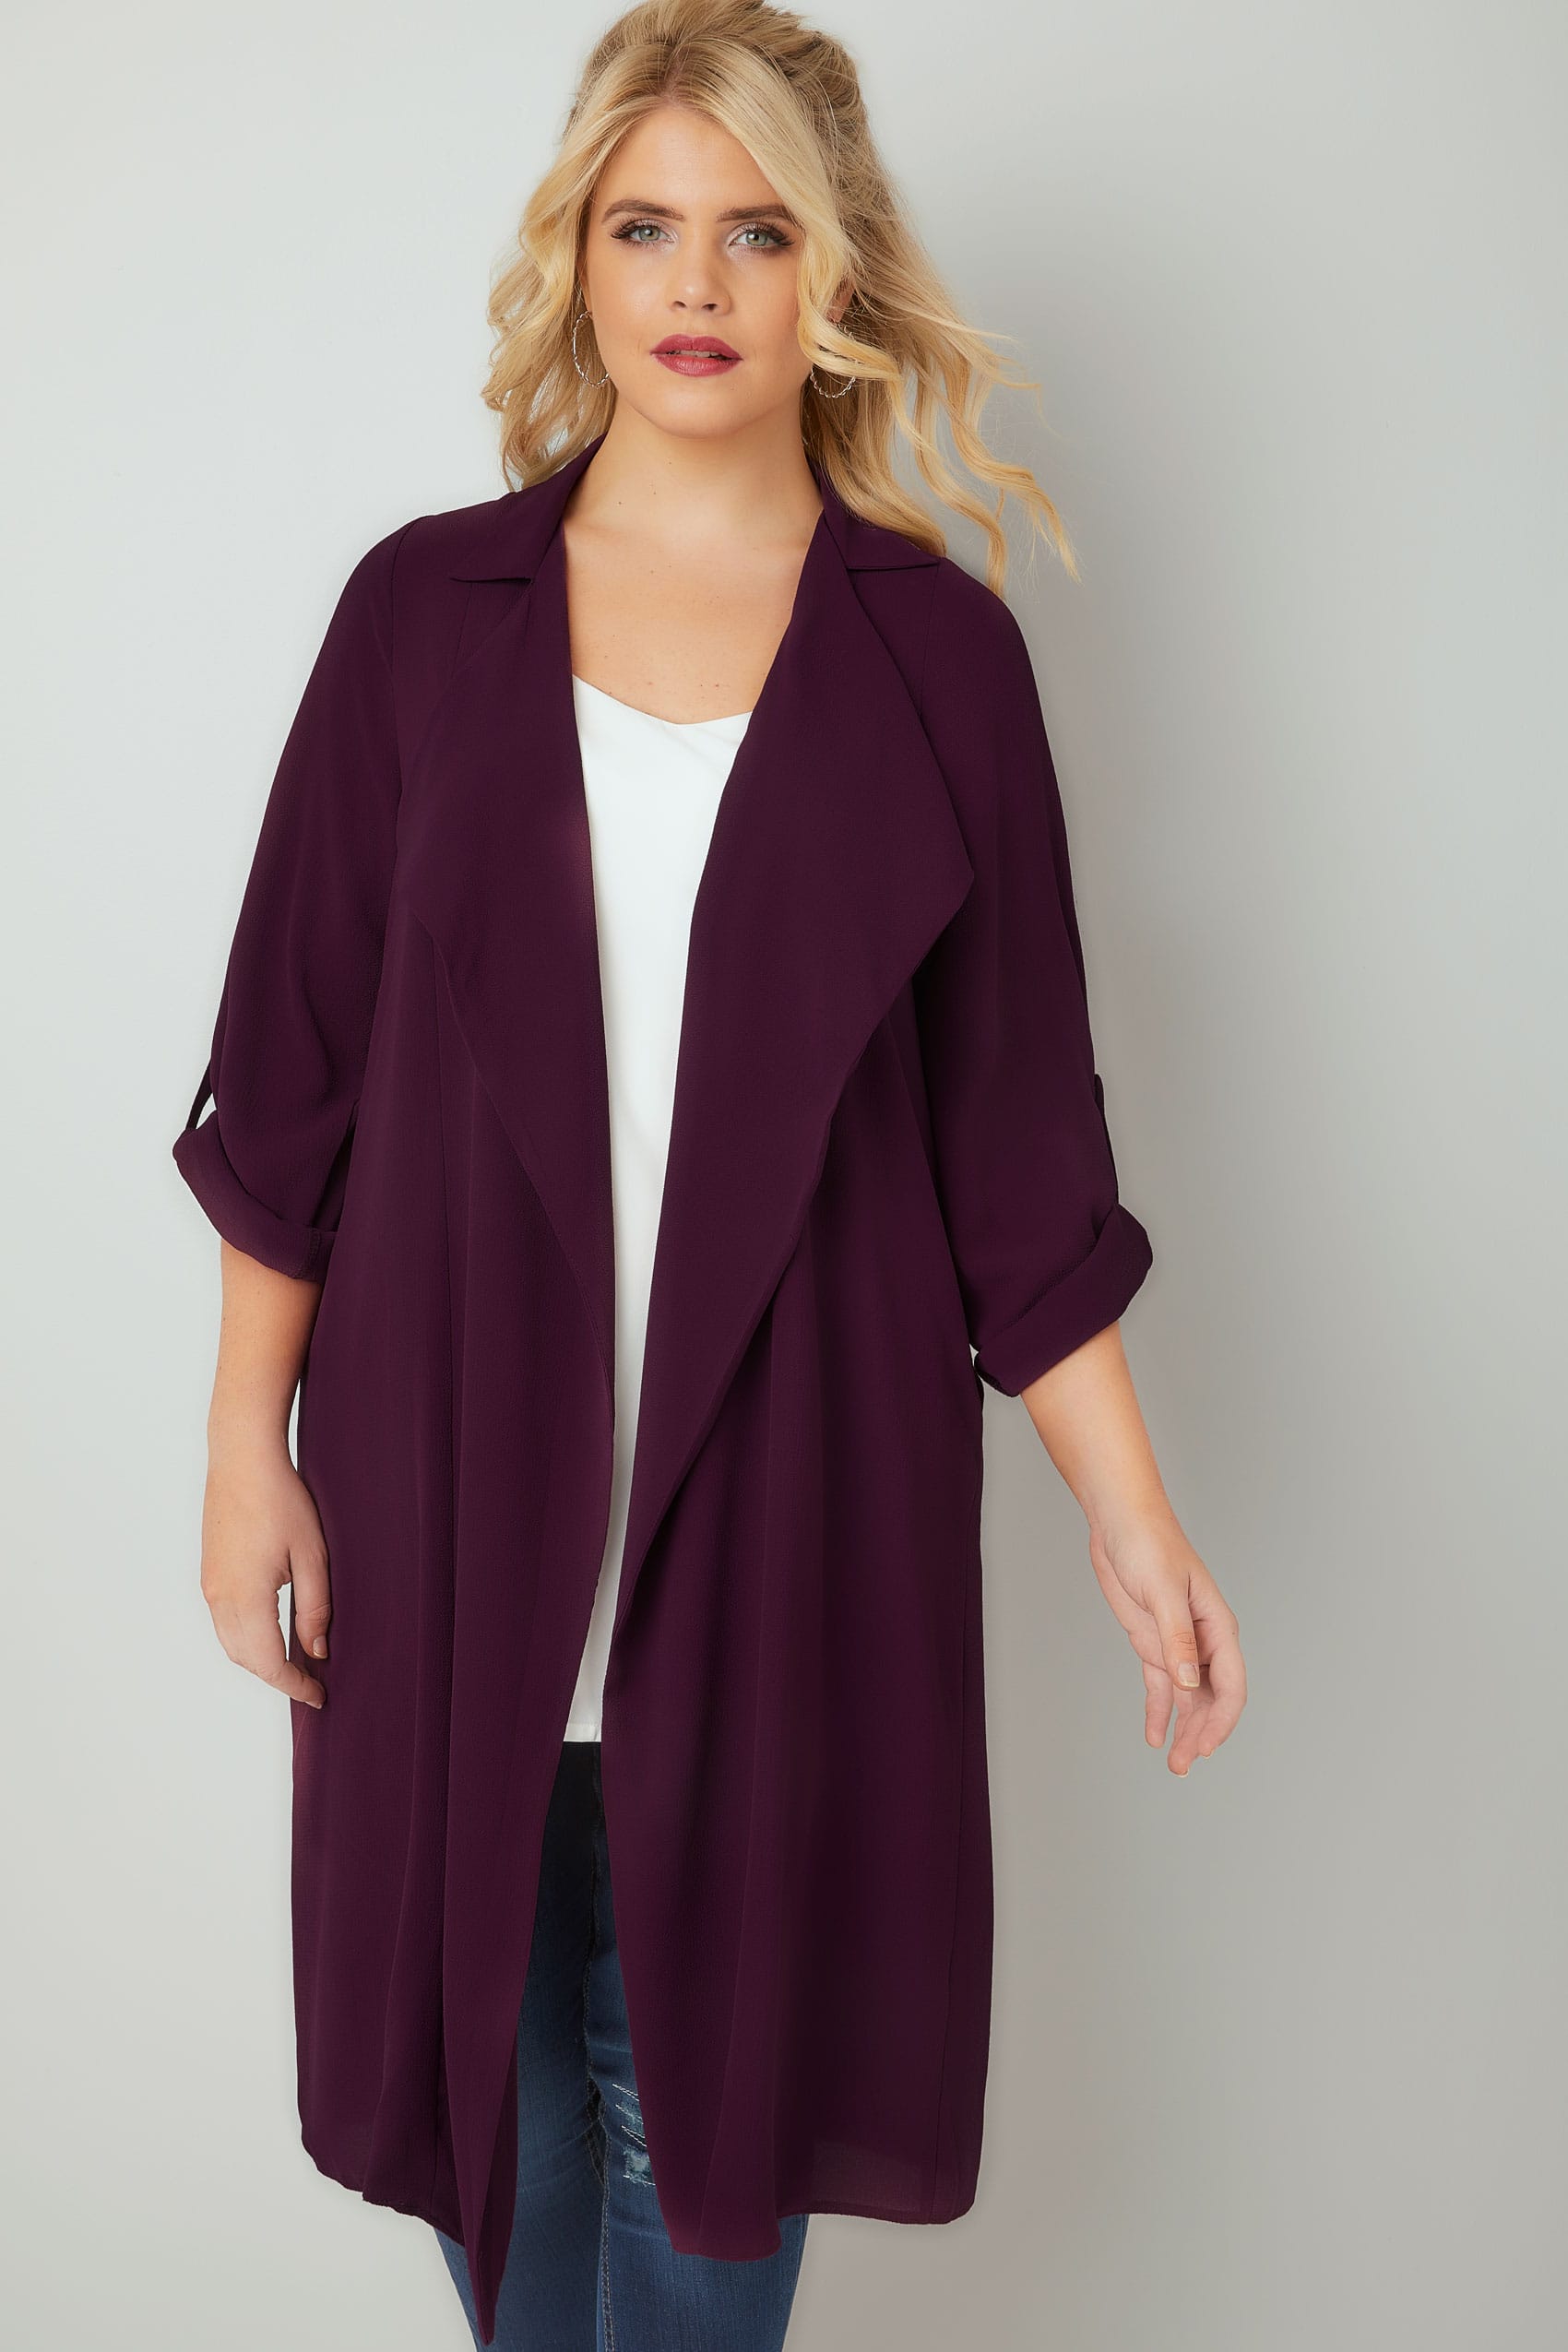 Dark Purple Lightweight Duster Jacket With Waterfall Front, Plus size ...